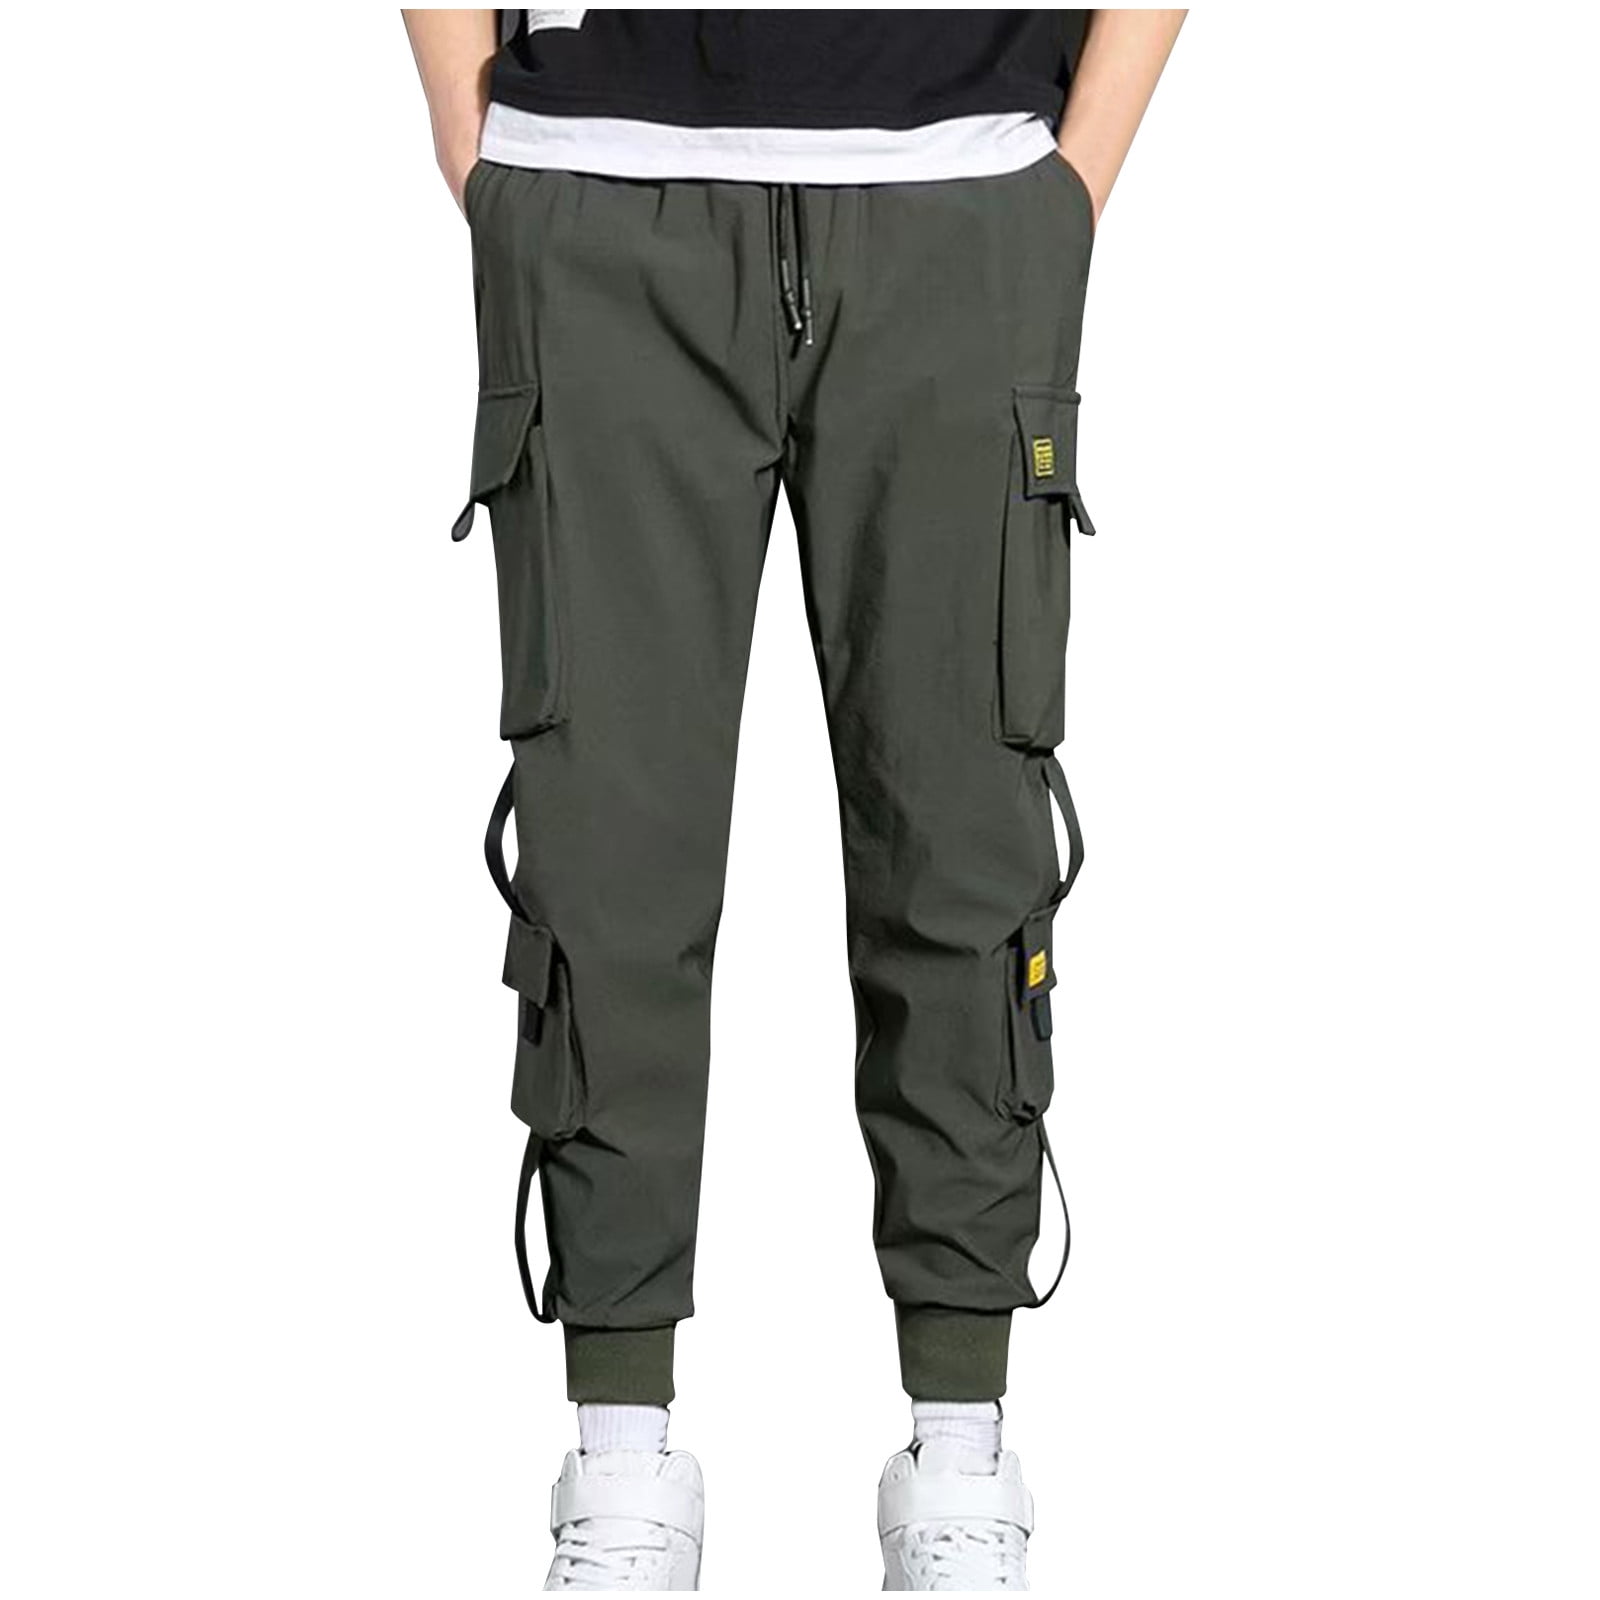 Flipkart sale From PETER ENGLAND to Urbano Fashion here are some  discounted comfy trousers for men details